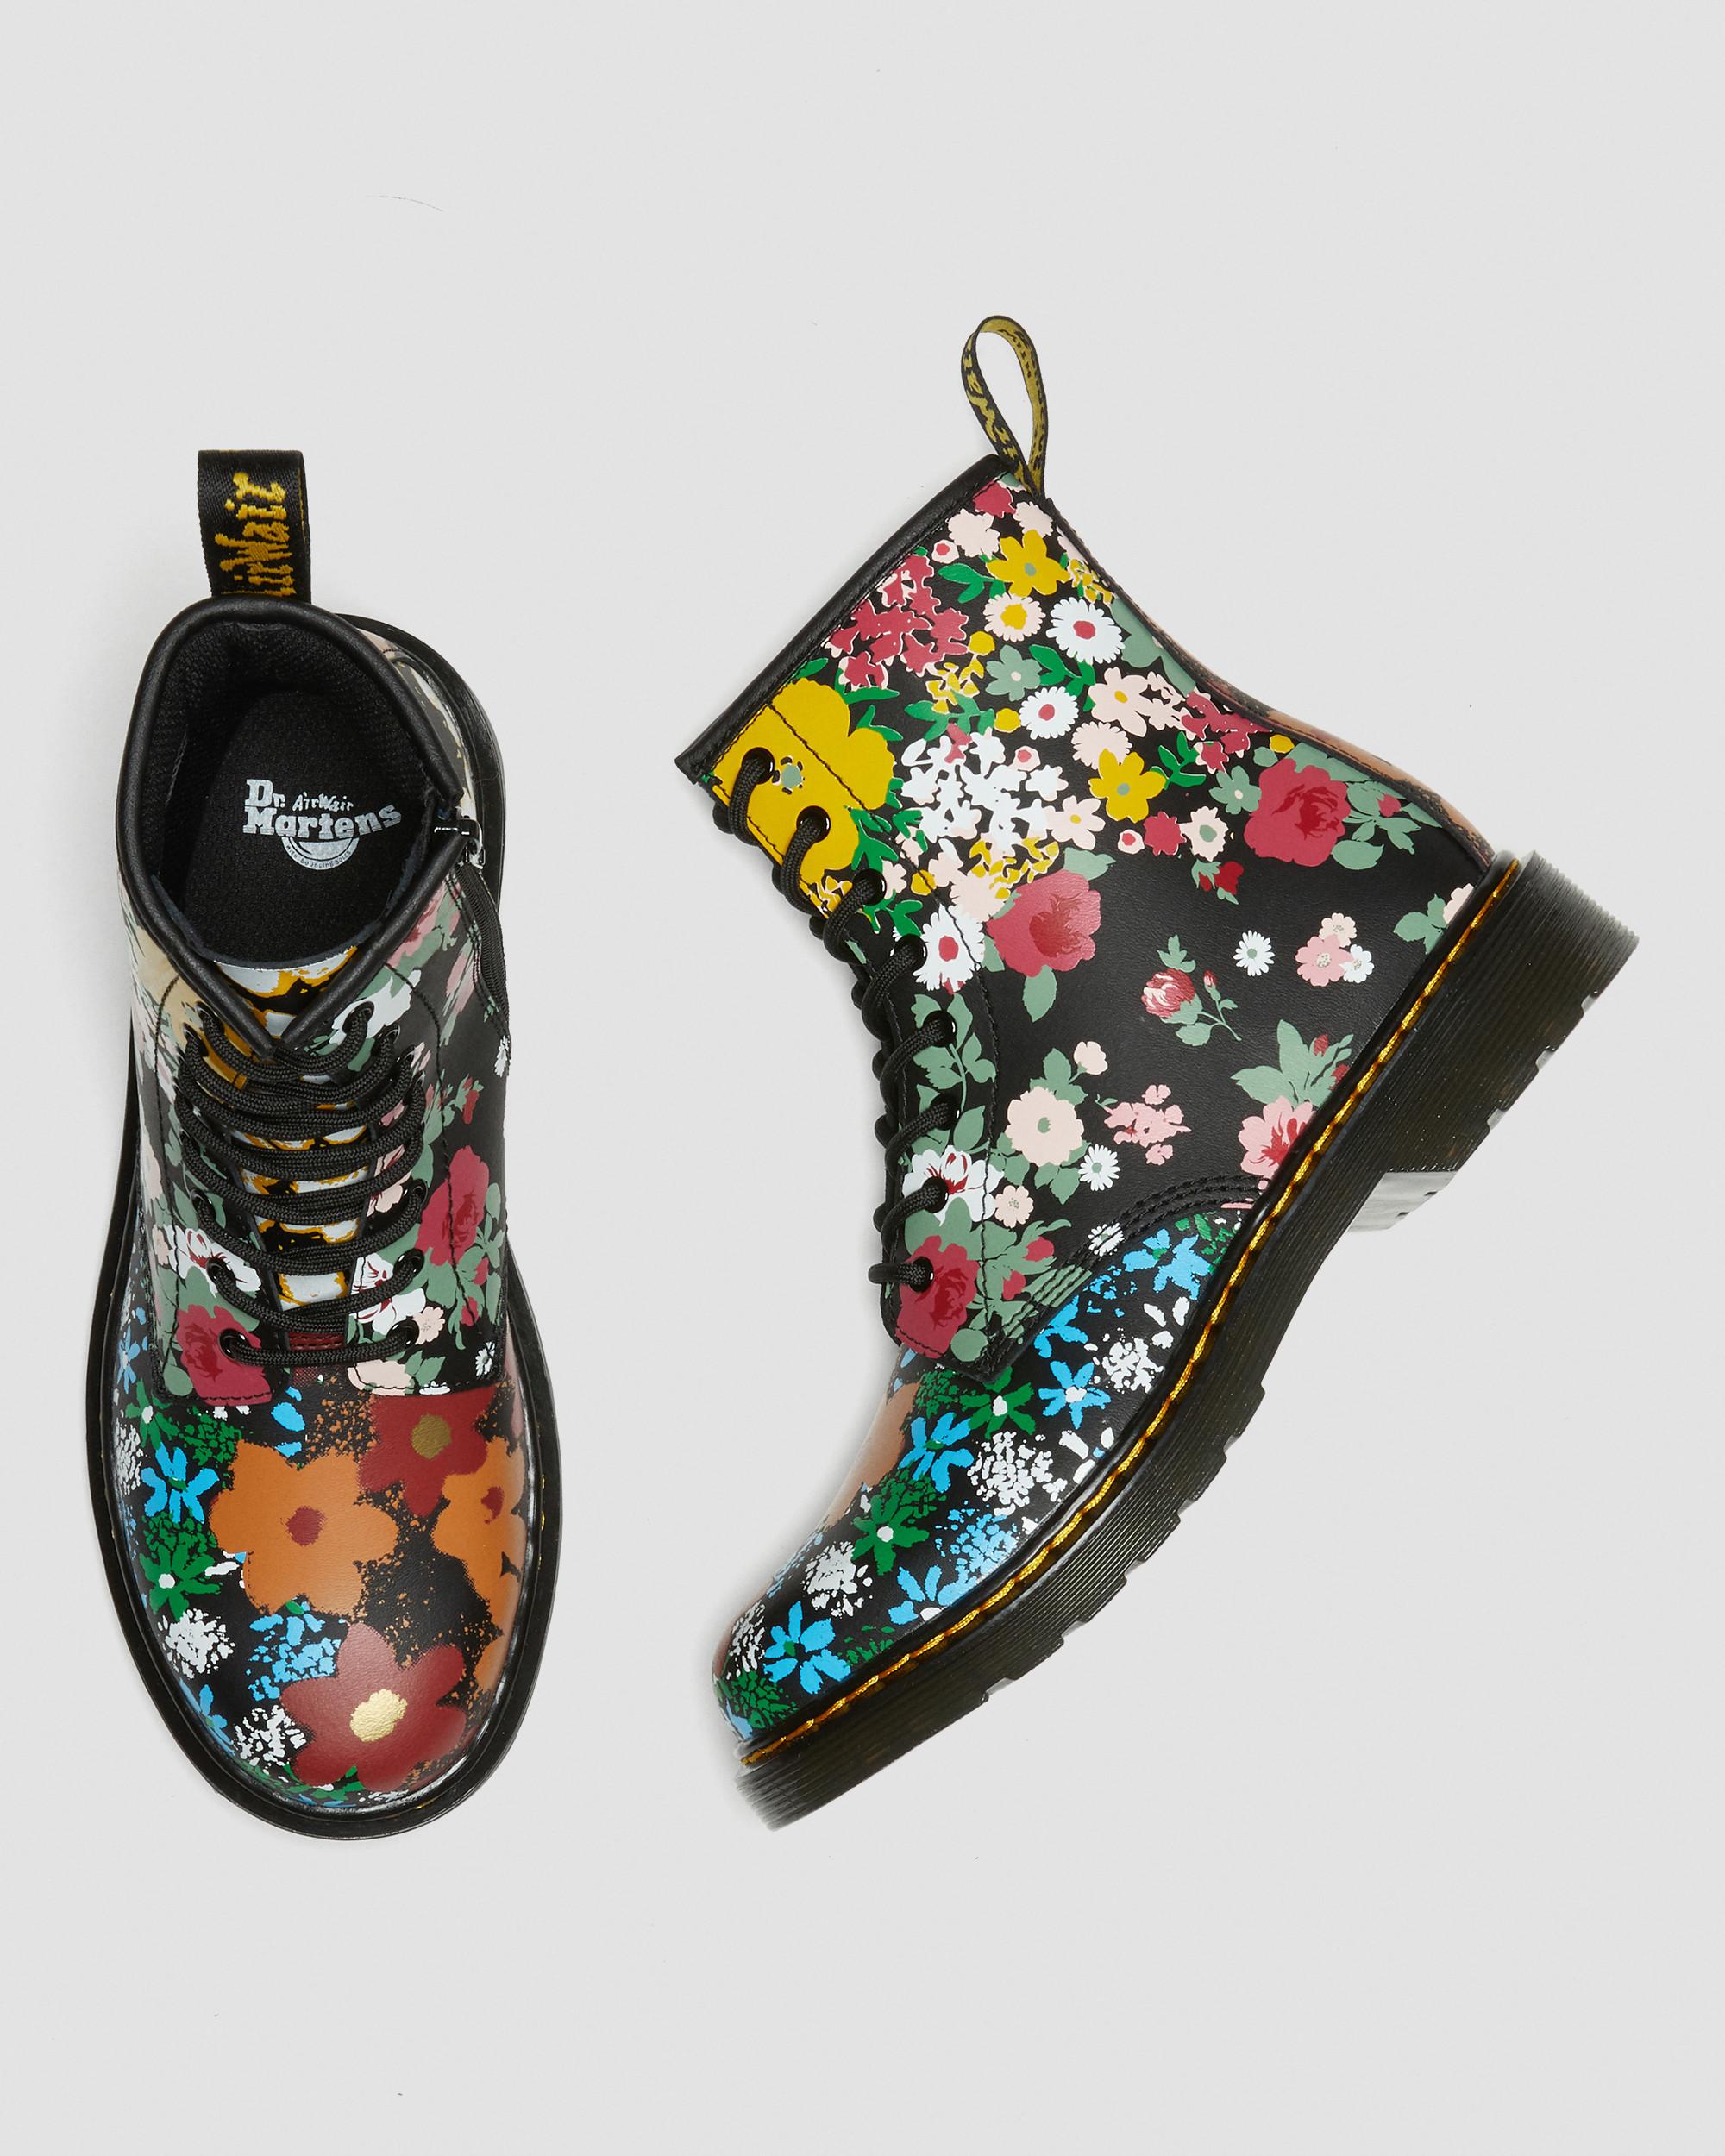 Martens Floral Leather Up Mash in Dr. | Lace Boots 1460 Black Youth Up